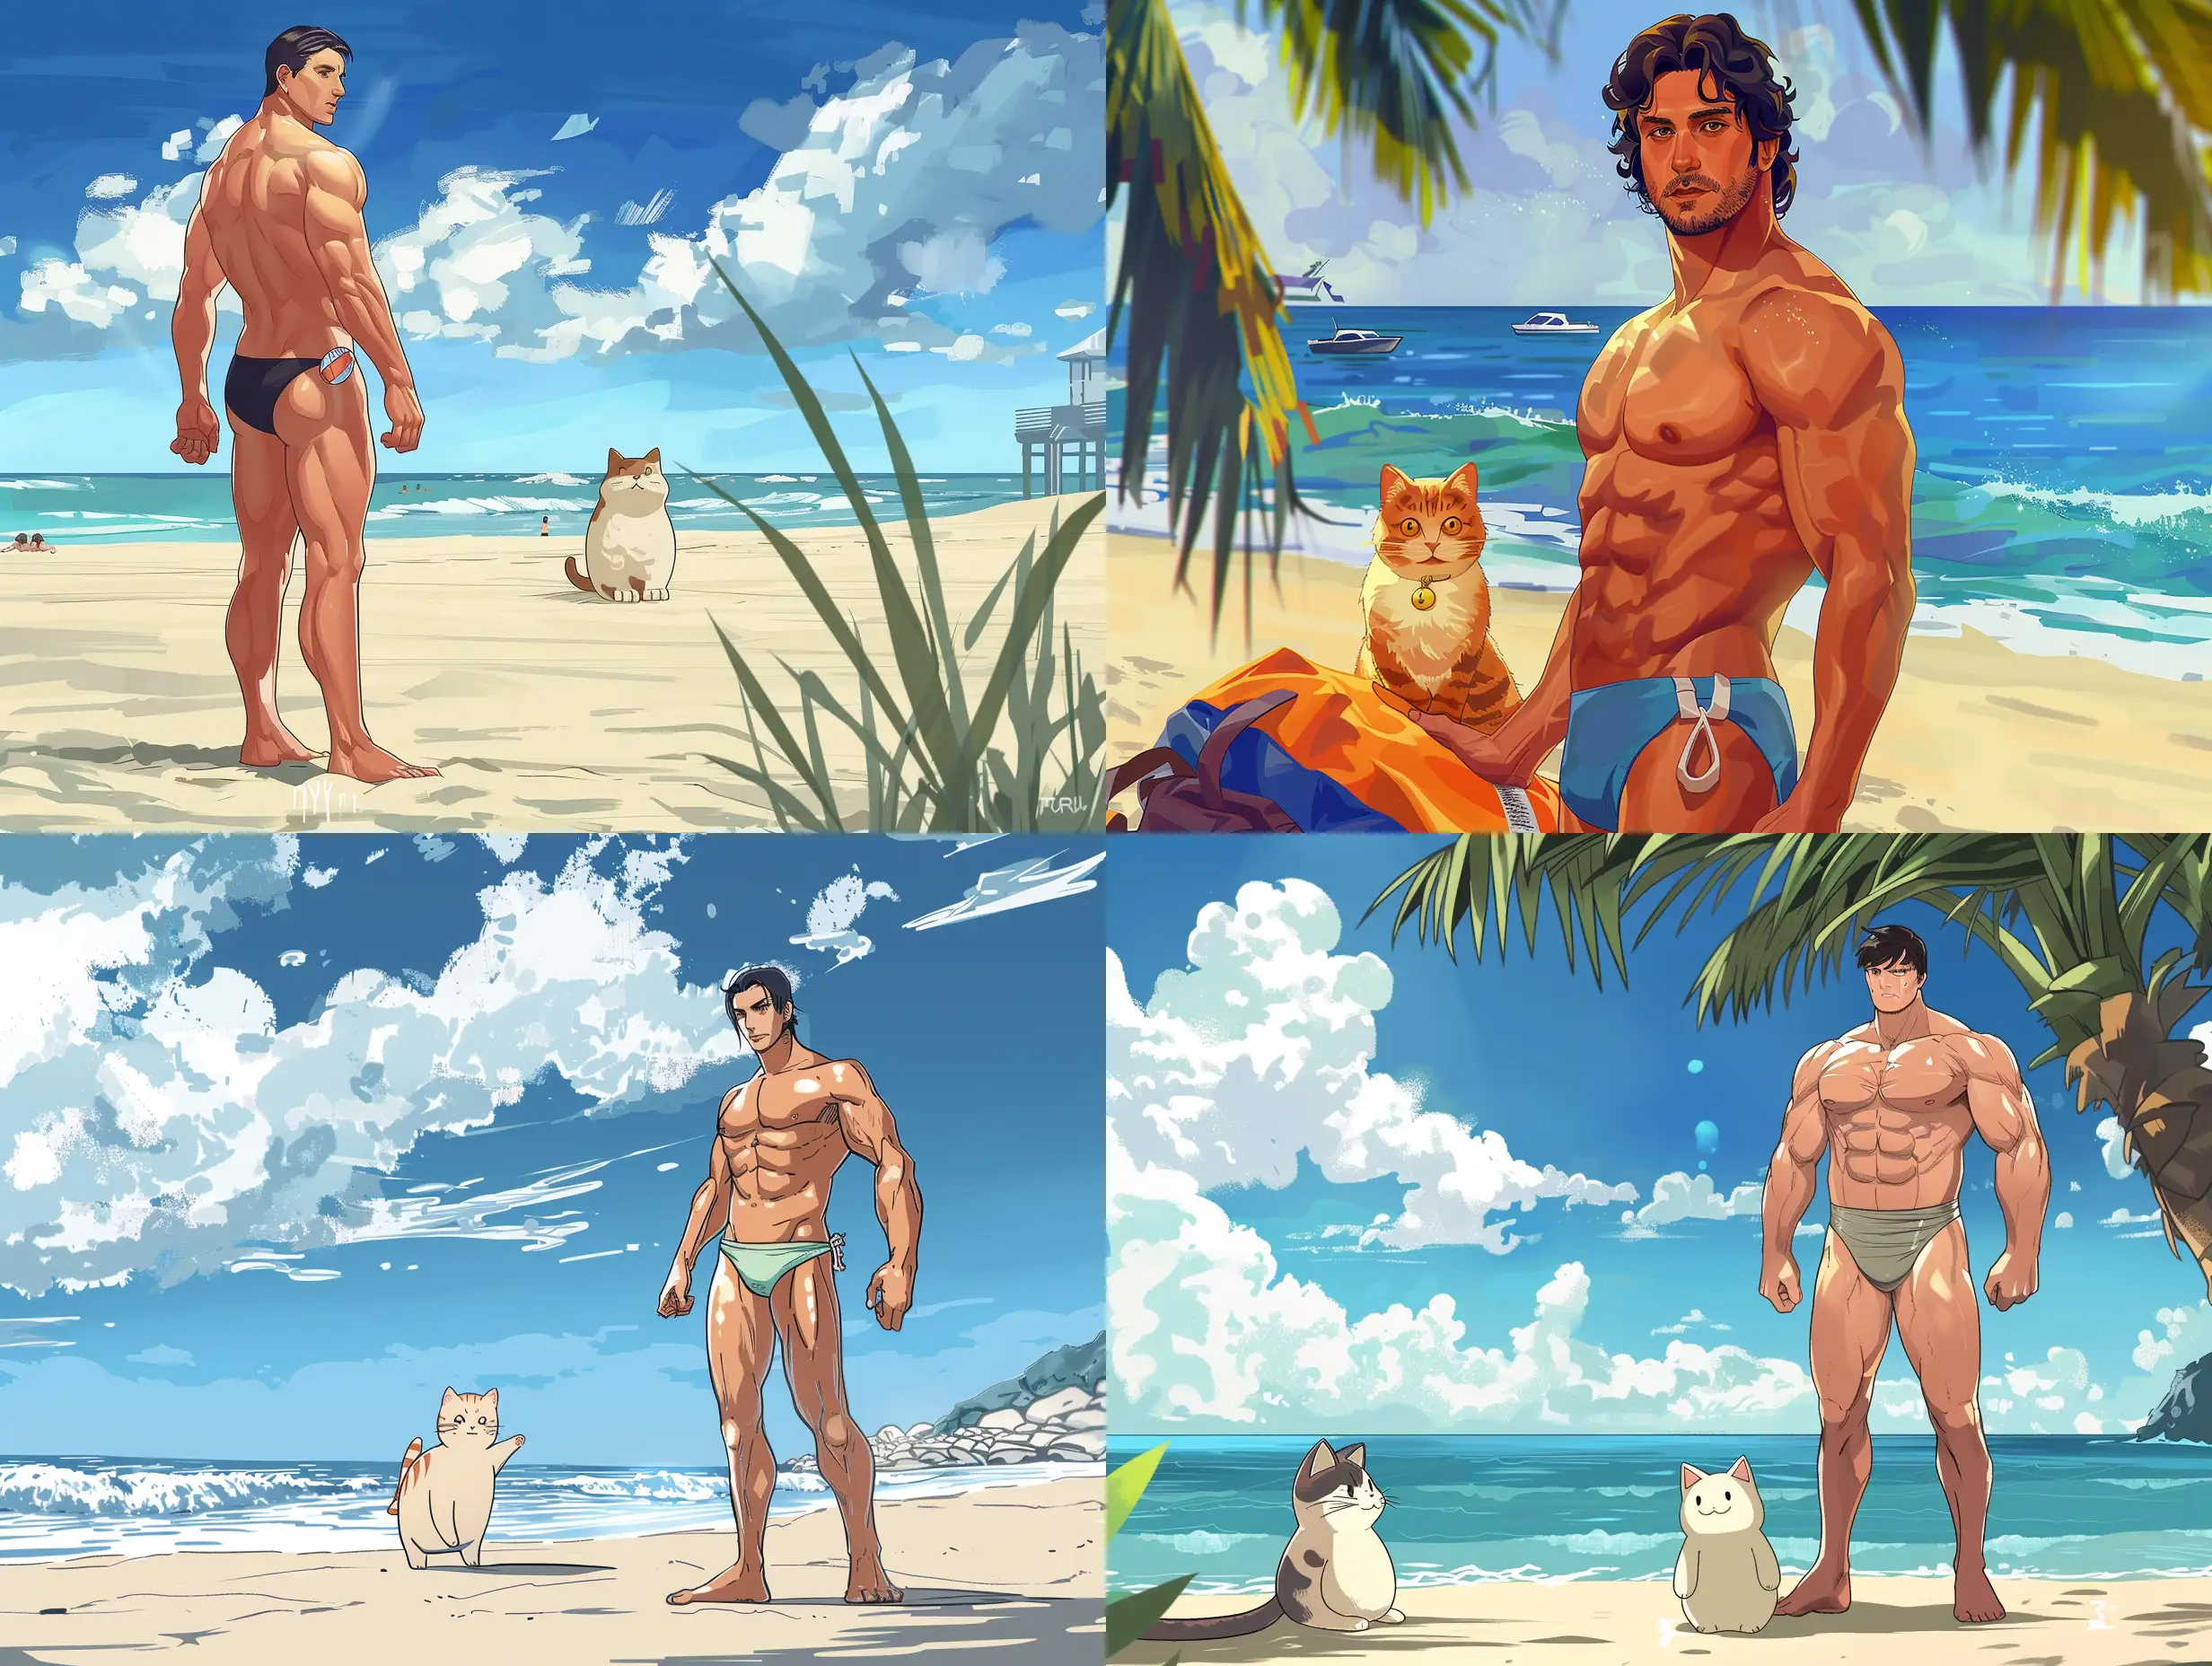 a man in a speedo on the beach with nyan cat. style is anime. 